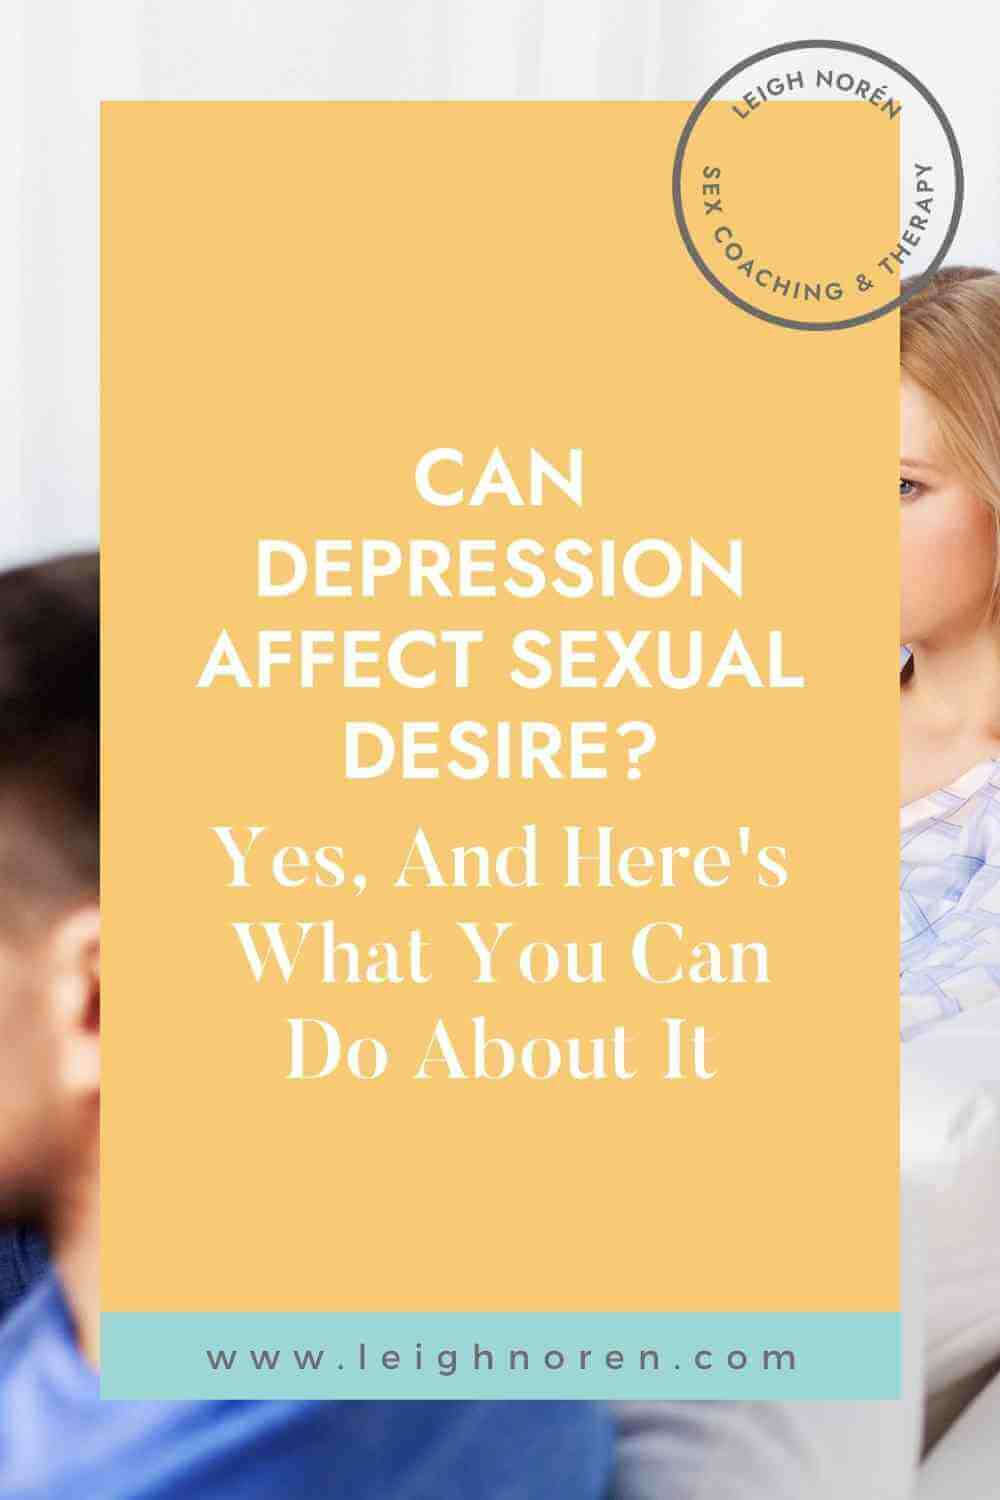 Can Depression Affect Sexual Desire? Yes, And Here's What You Can Do About It